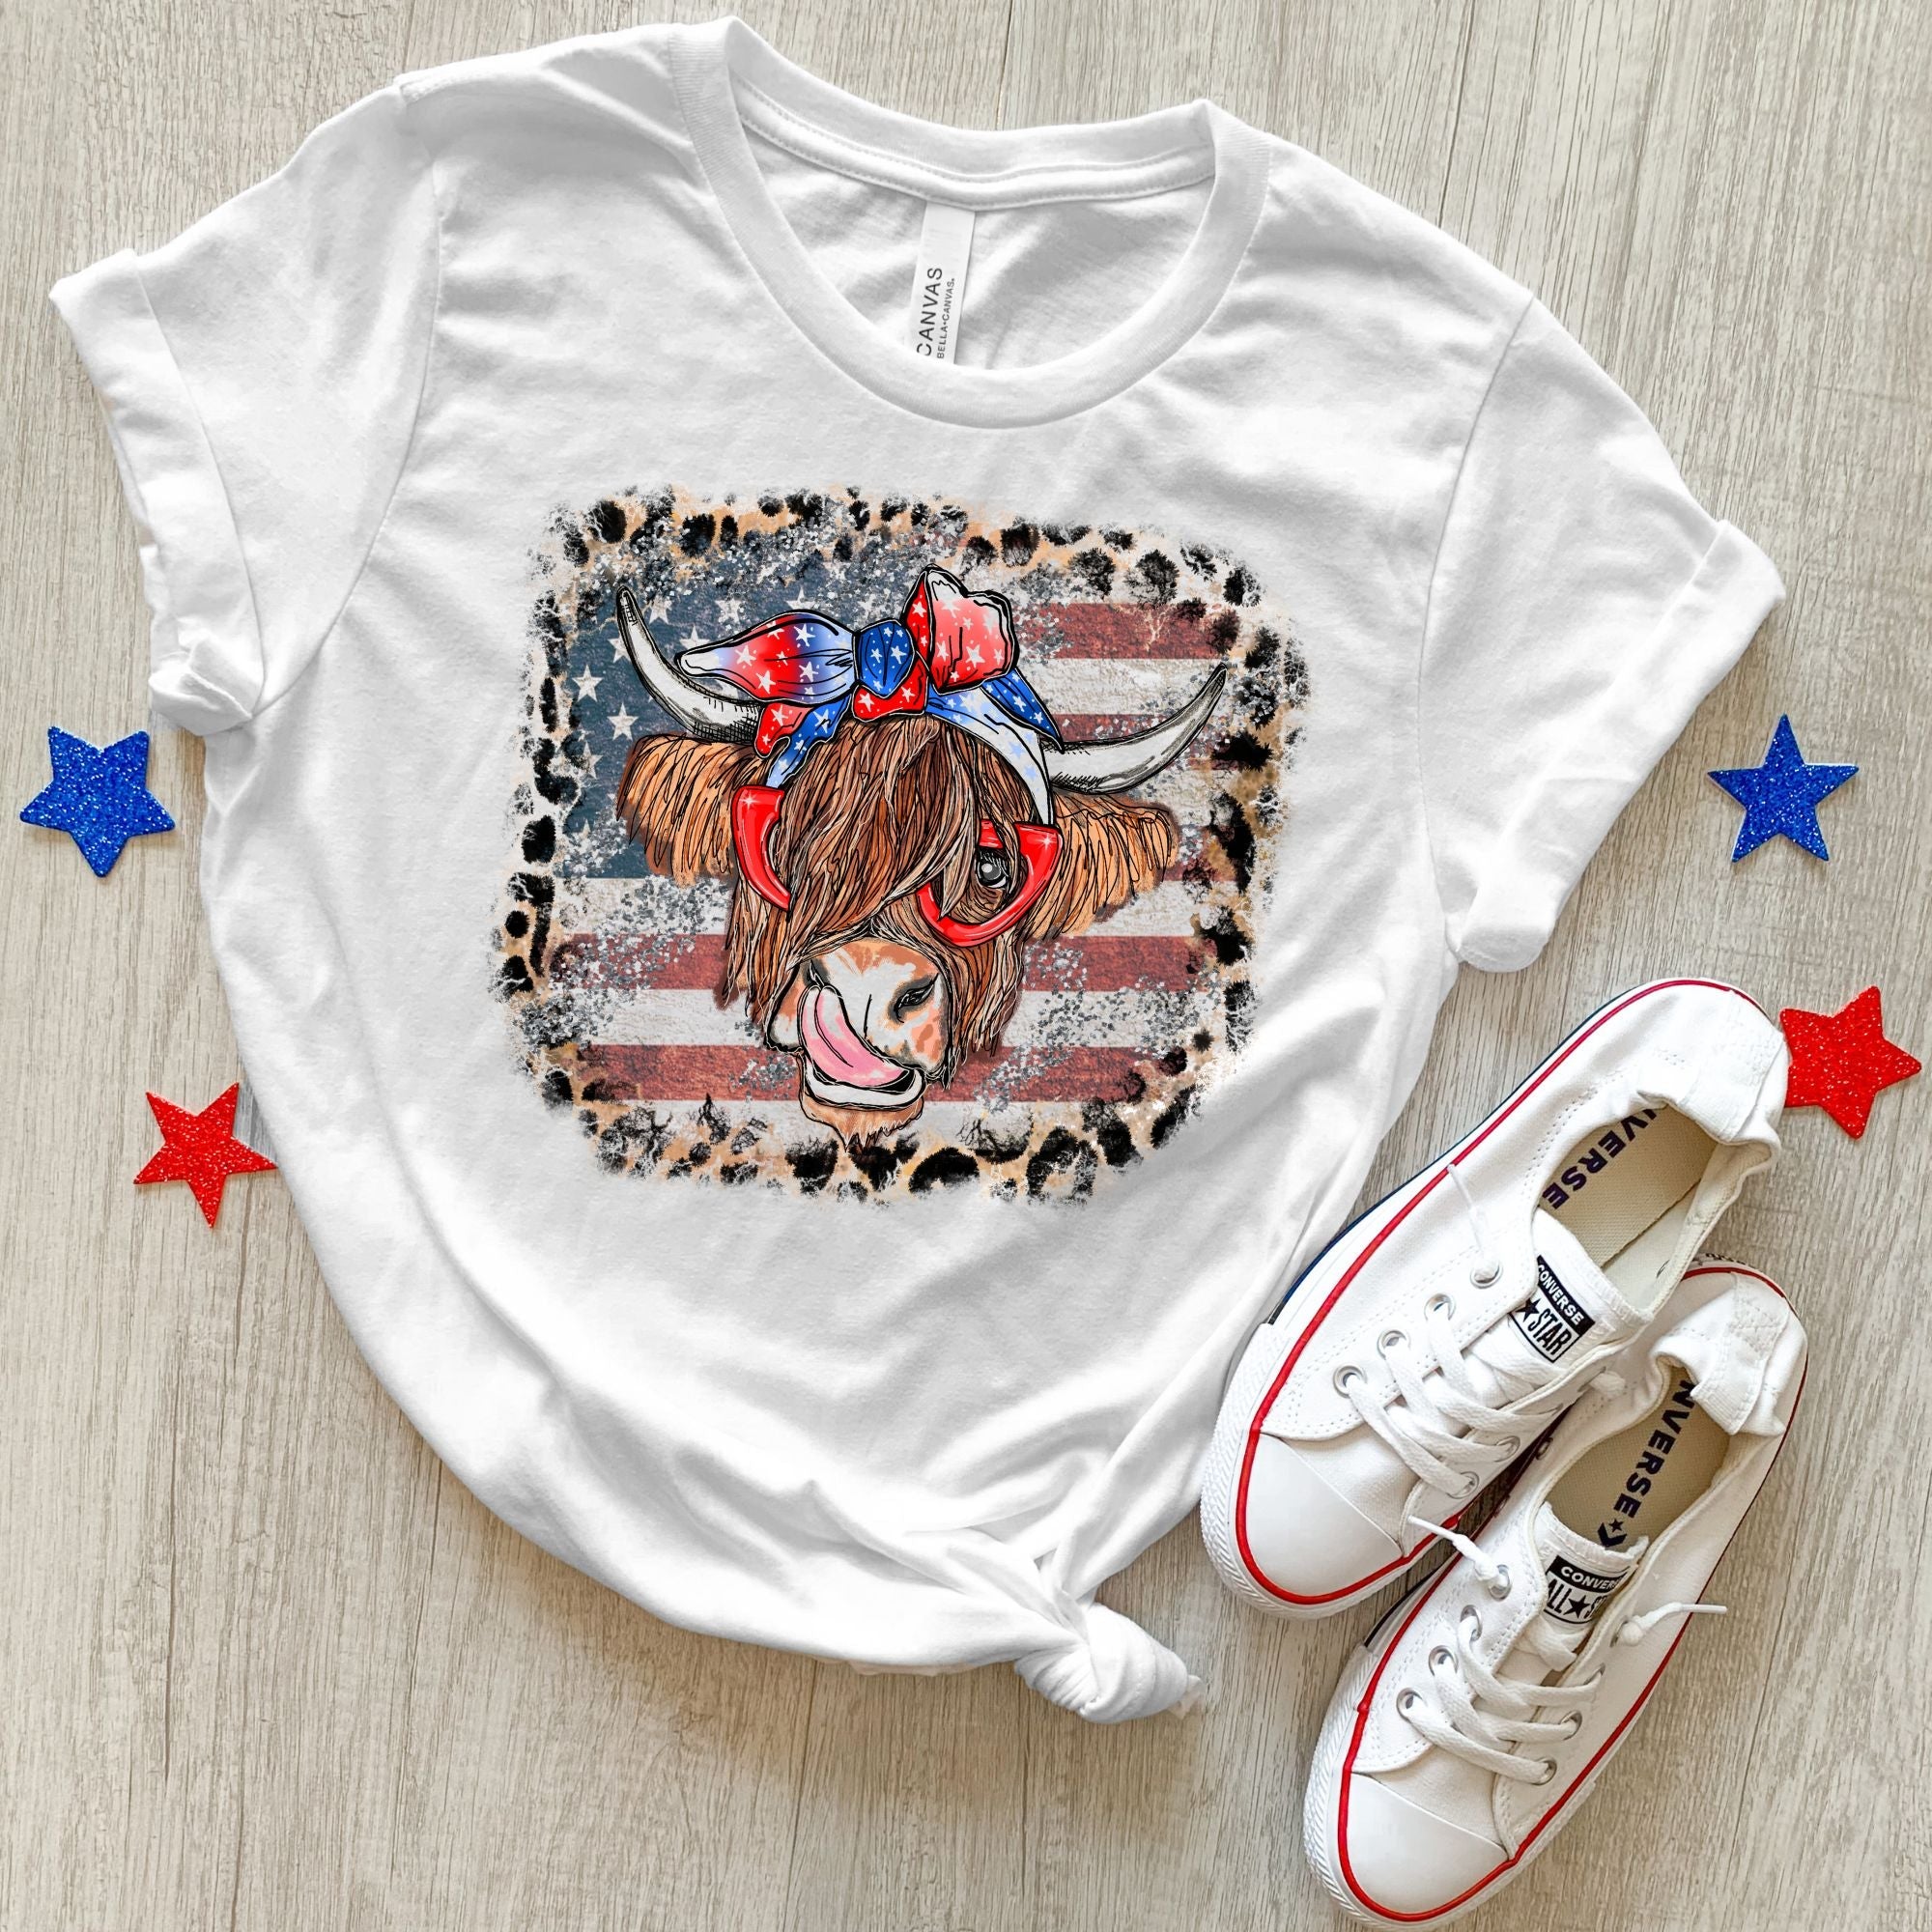 Patriotic Cow T Shirt for 4th Of July *UNISEX FIT*-Graphic Tees-208 Tees Wholesale, Idaho